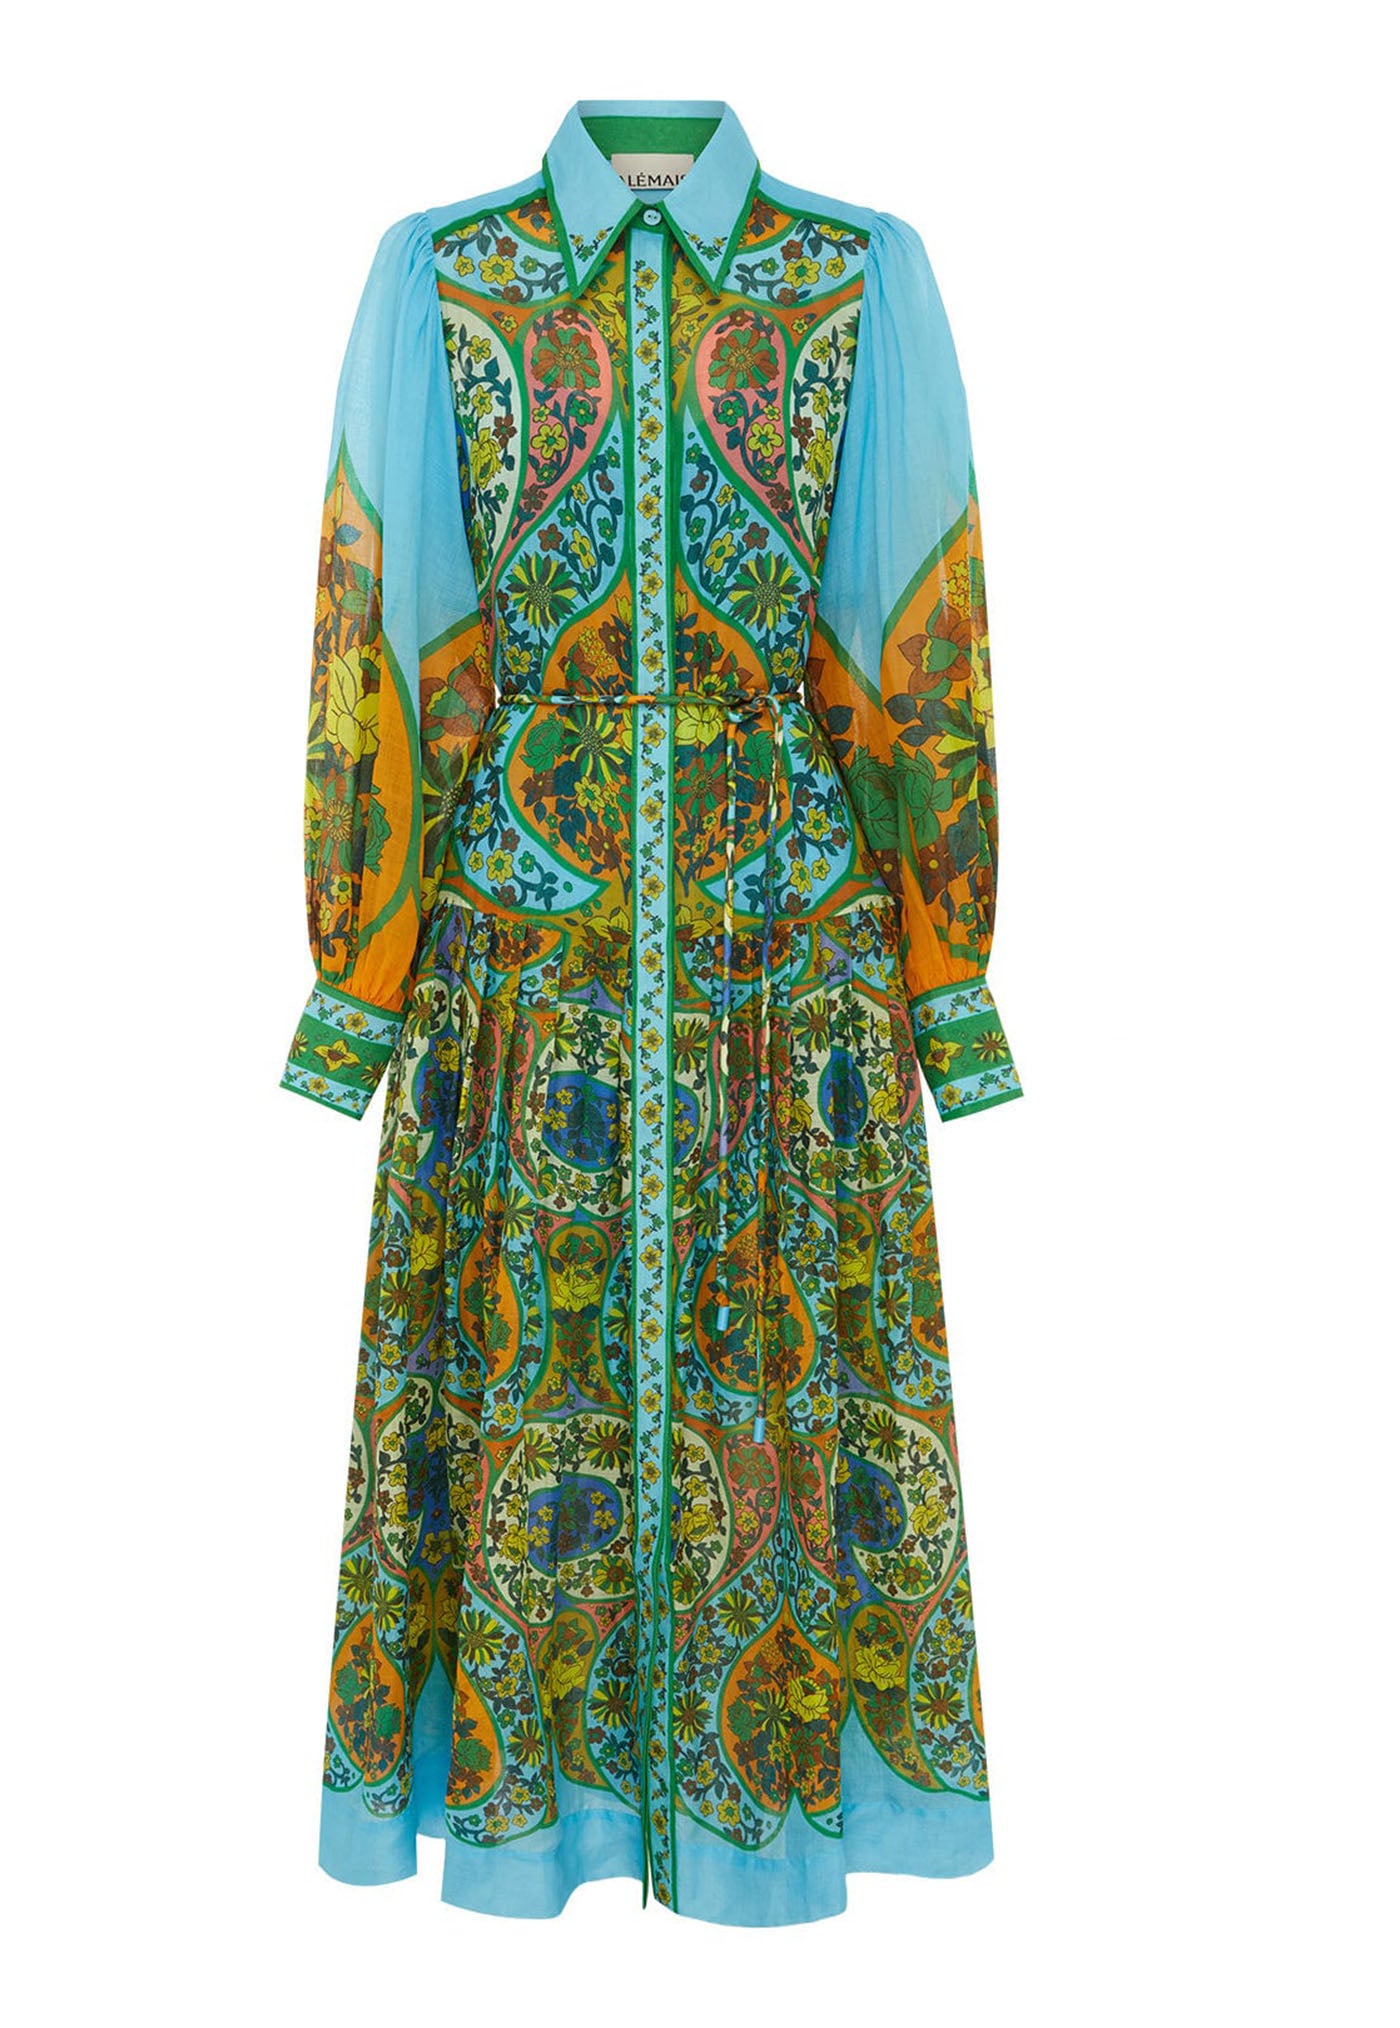 Sofie Shirtdress - Multi sold by Angel Divine